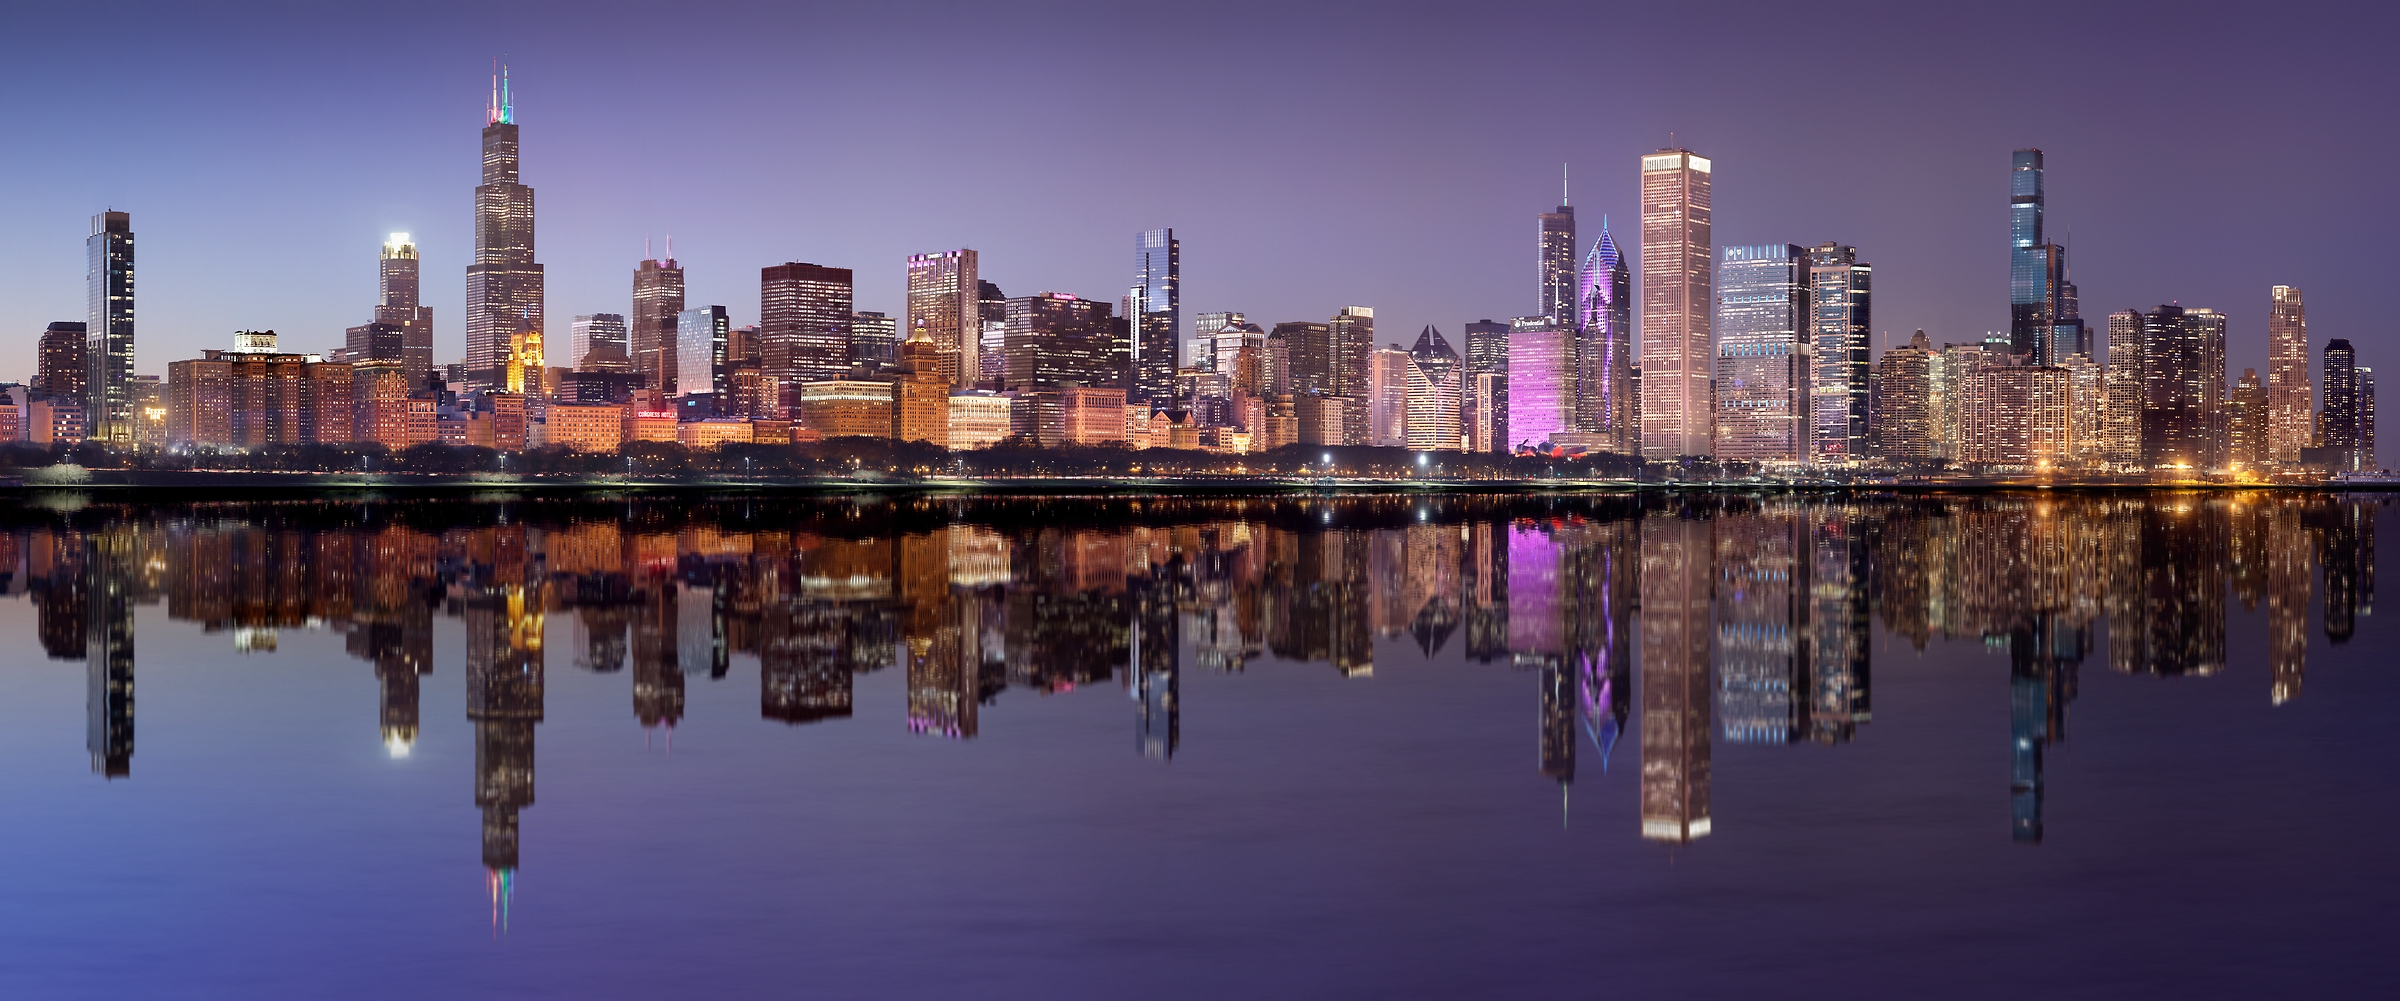 863 megapixels! A very high resolution Chicago skyline photo; created by Phil Crawshay in Chicago, Illinois.